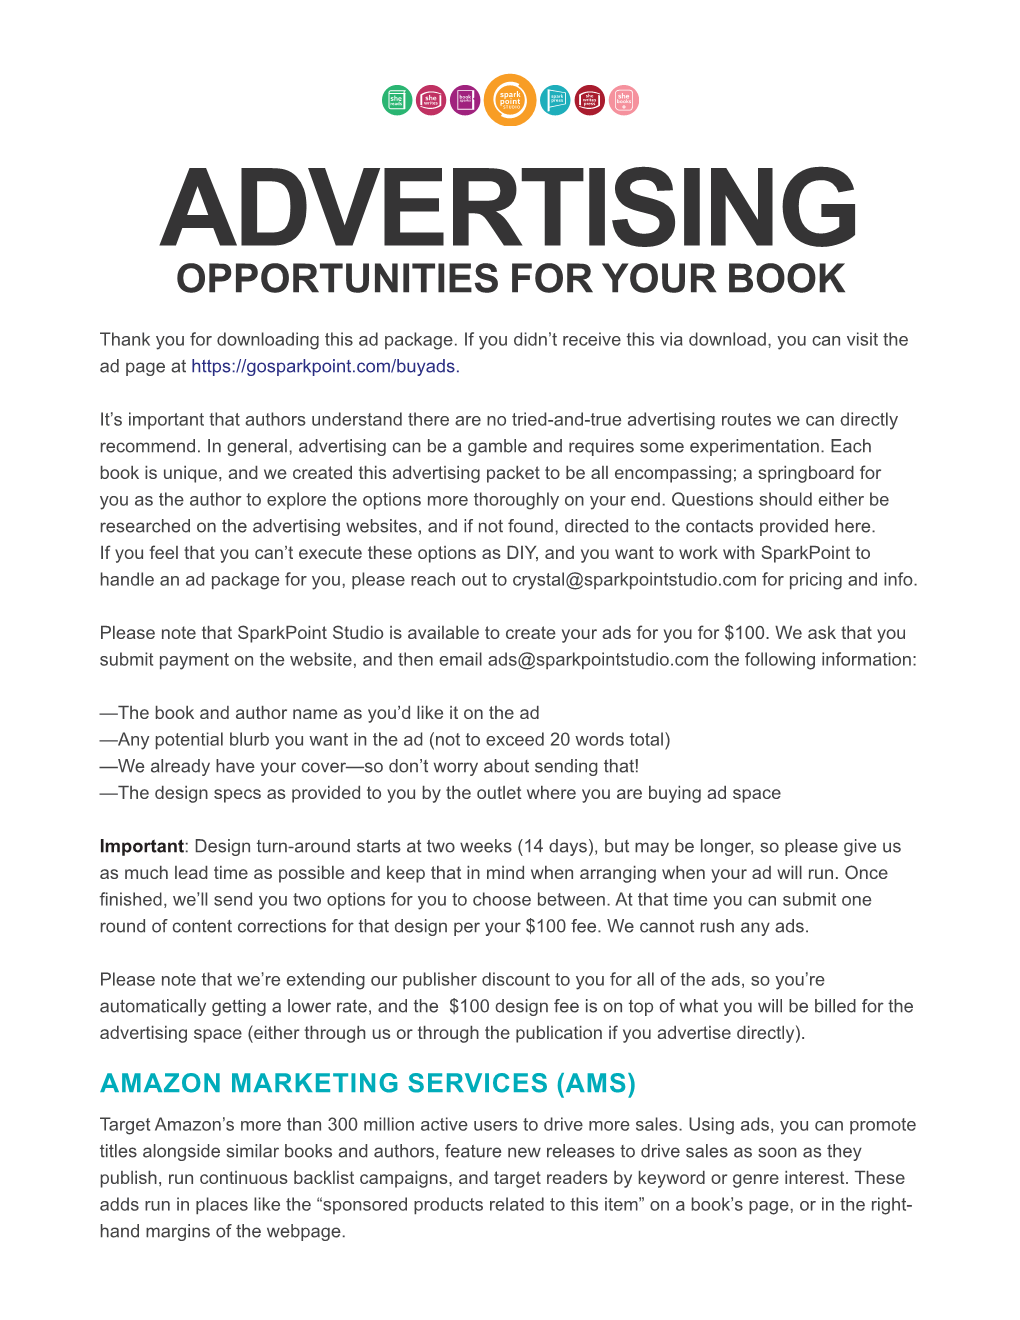 Advertising Opportunities for Your Book